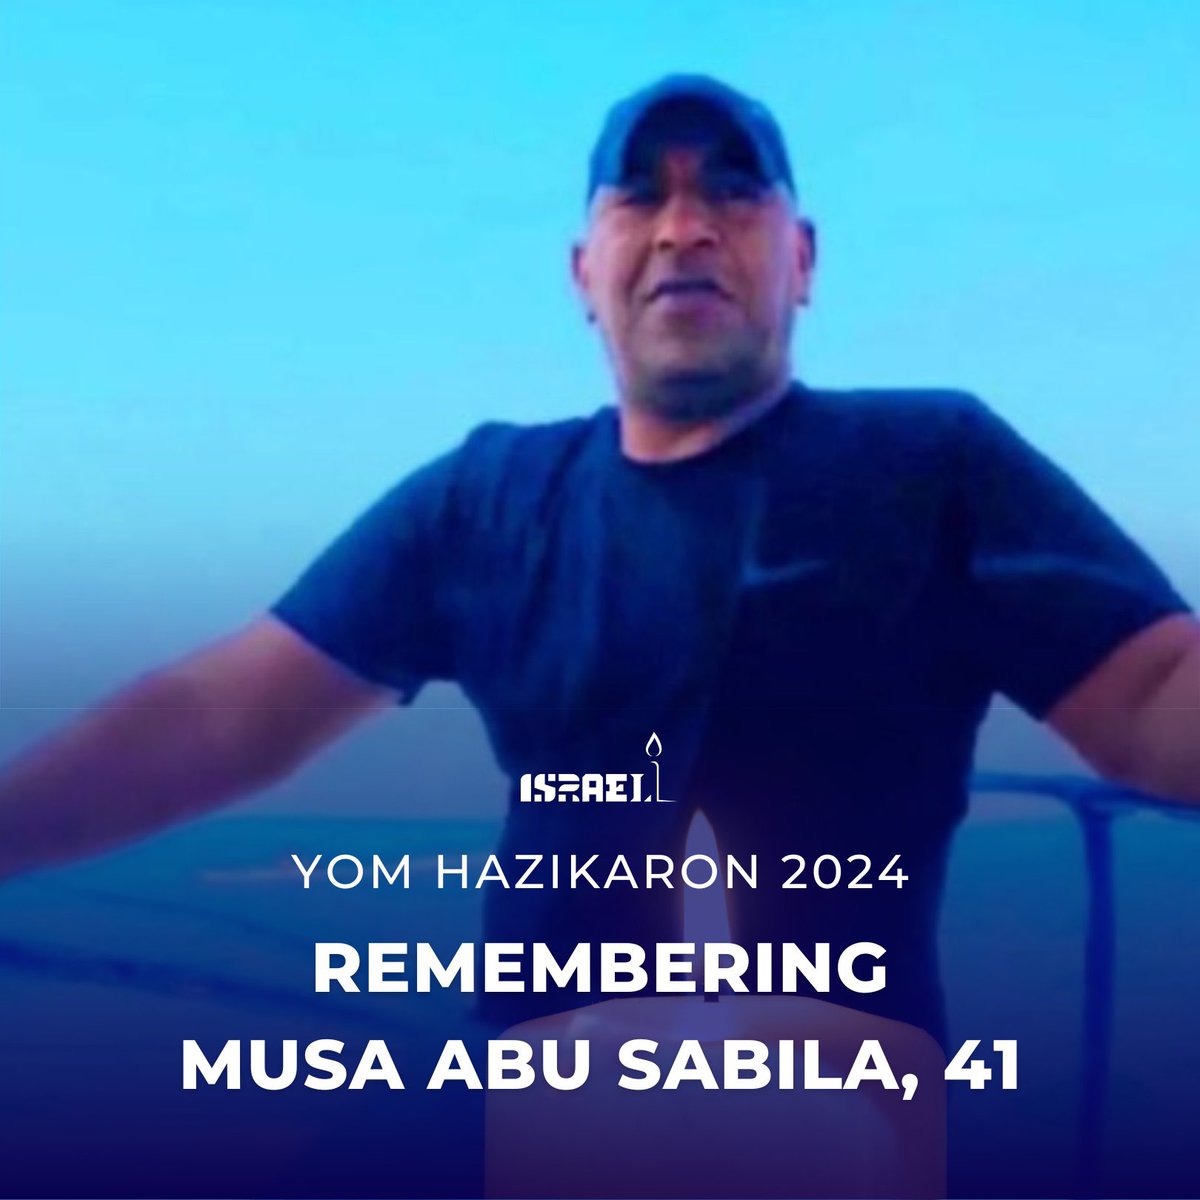 Musa Abu Sabila, 41, was an off-duty Bedouin IDF soldier who was working as a security guard near Kibbutz Re'im on October 7. He was murdered by Hamas terrorists while he was on his way to rescue his nephew who was in Kibbutz Reim. May Musa Abu Sabila's memory be a blessing.